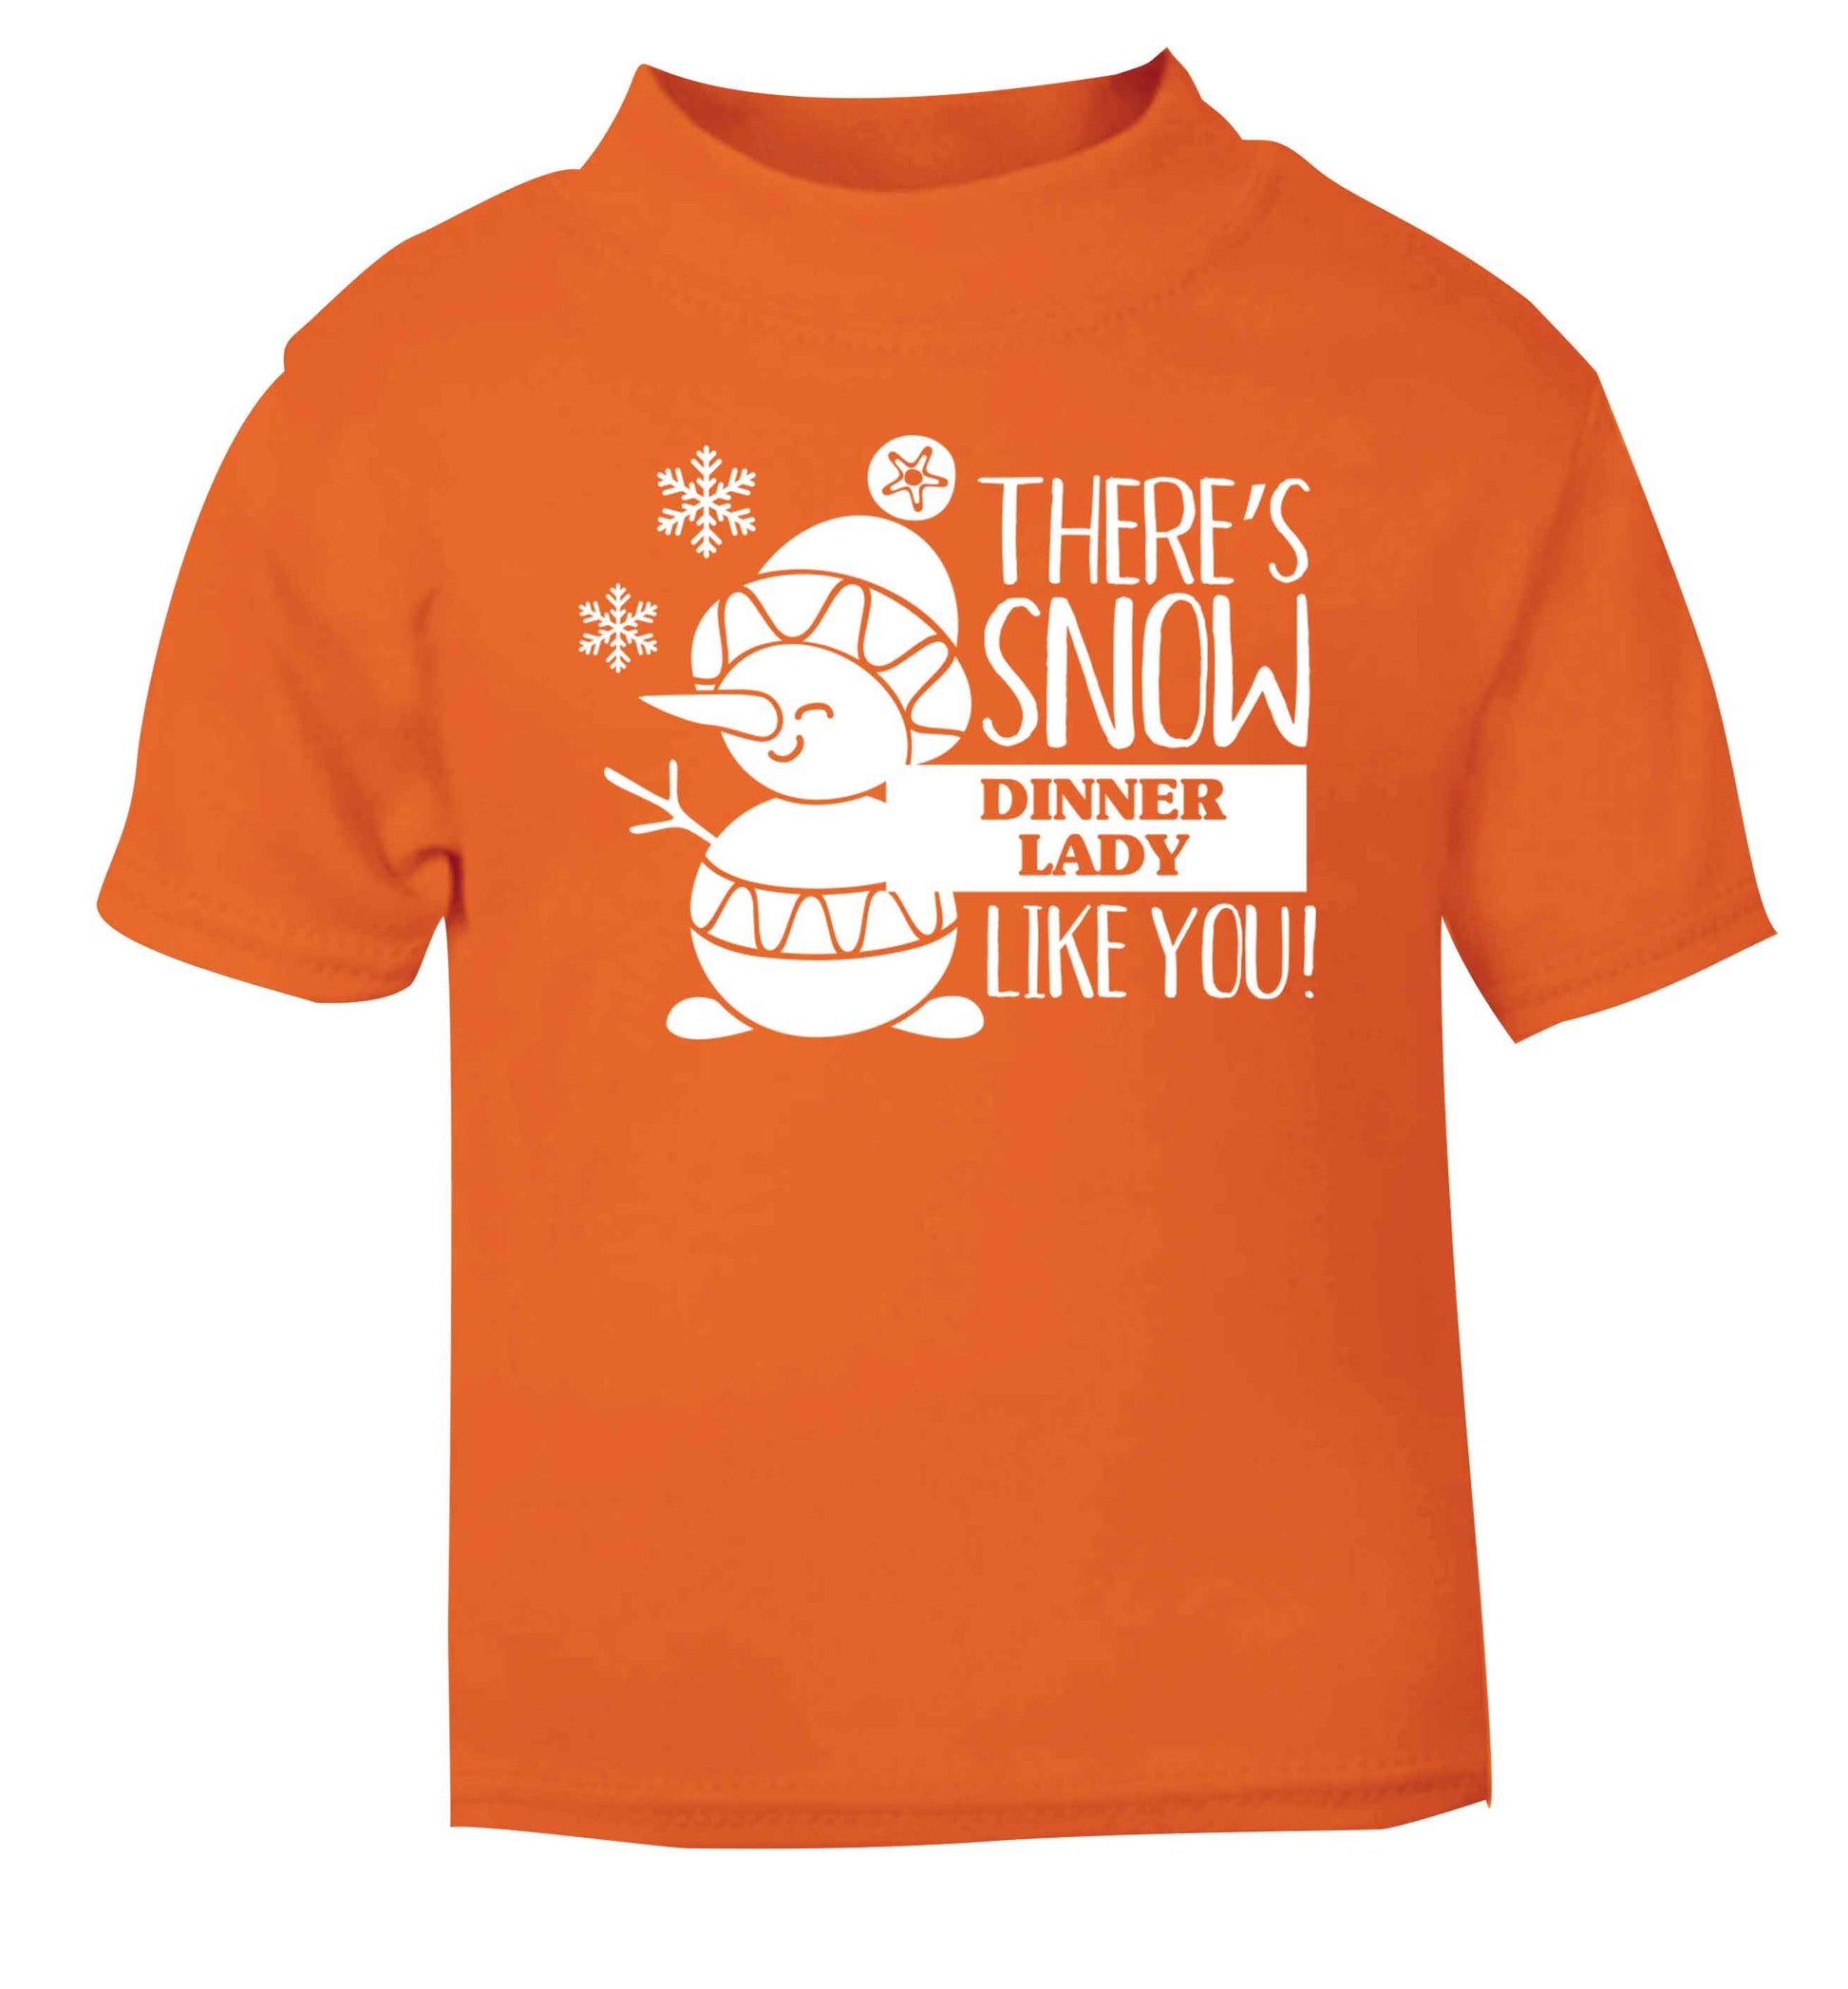 There's snow dinner lady like you orange baby toddler Tshirt 2 Years